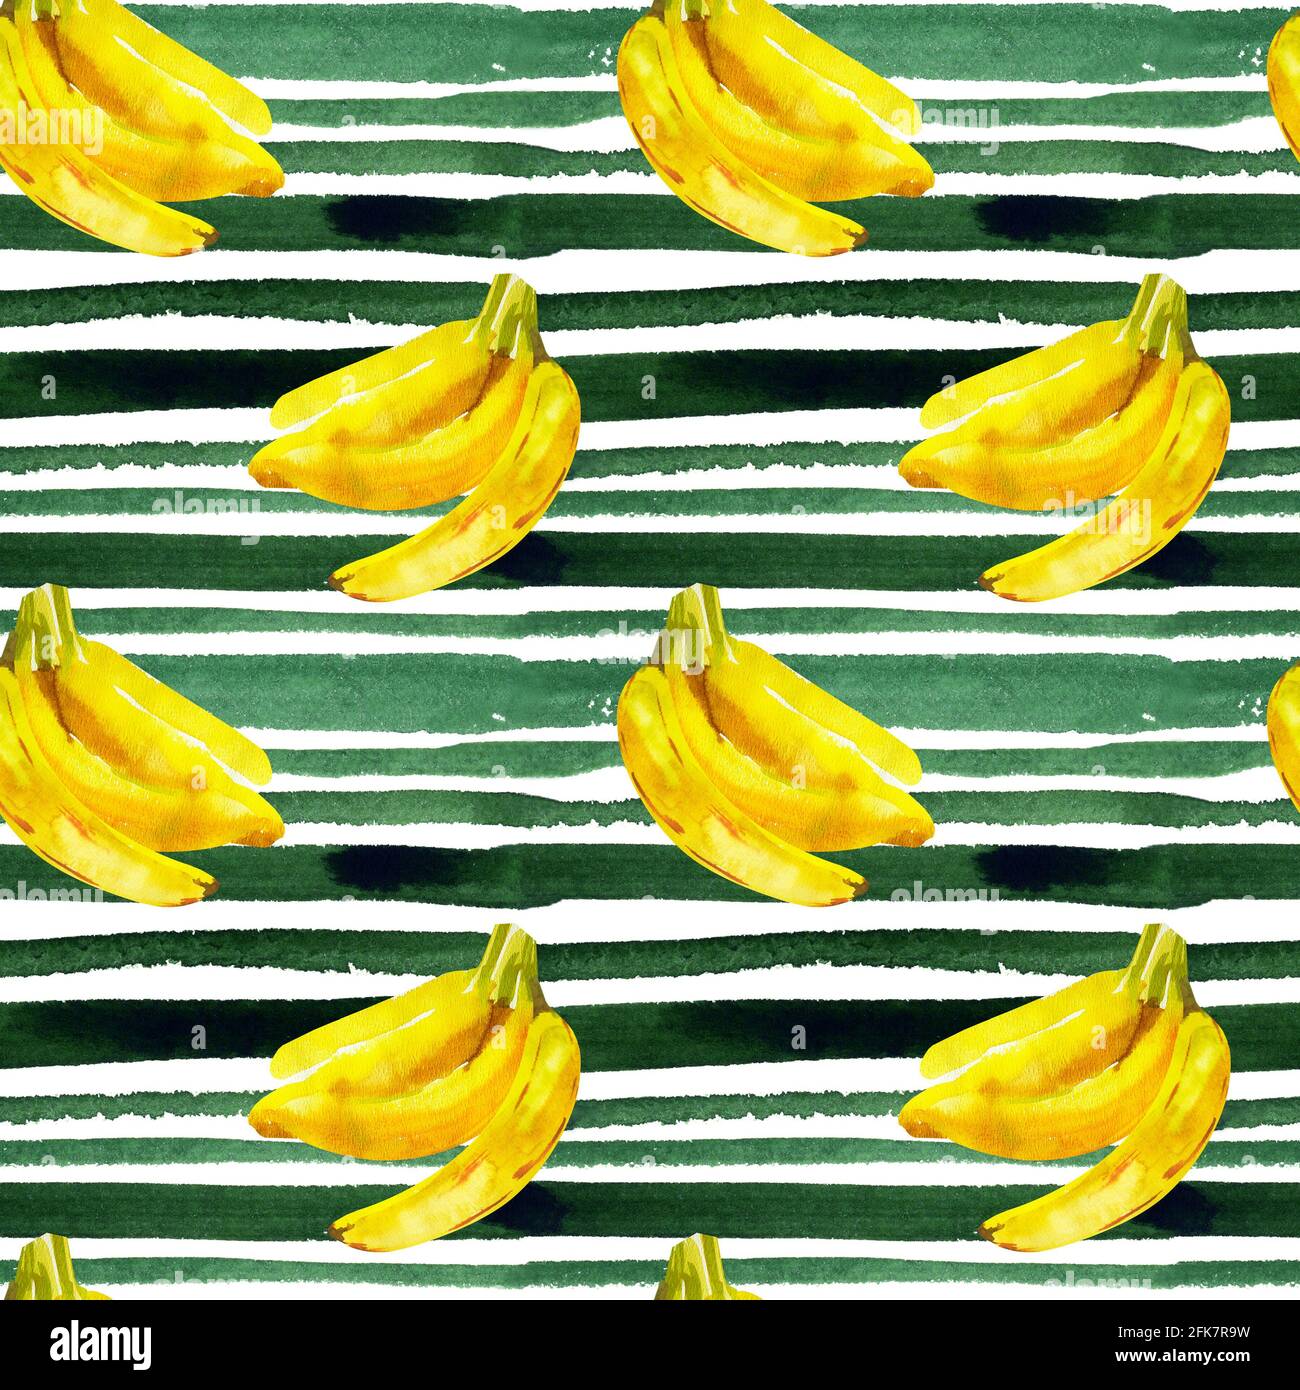 Pattern with watercolor illustration of bananas on a background of green stripes Stock Photo